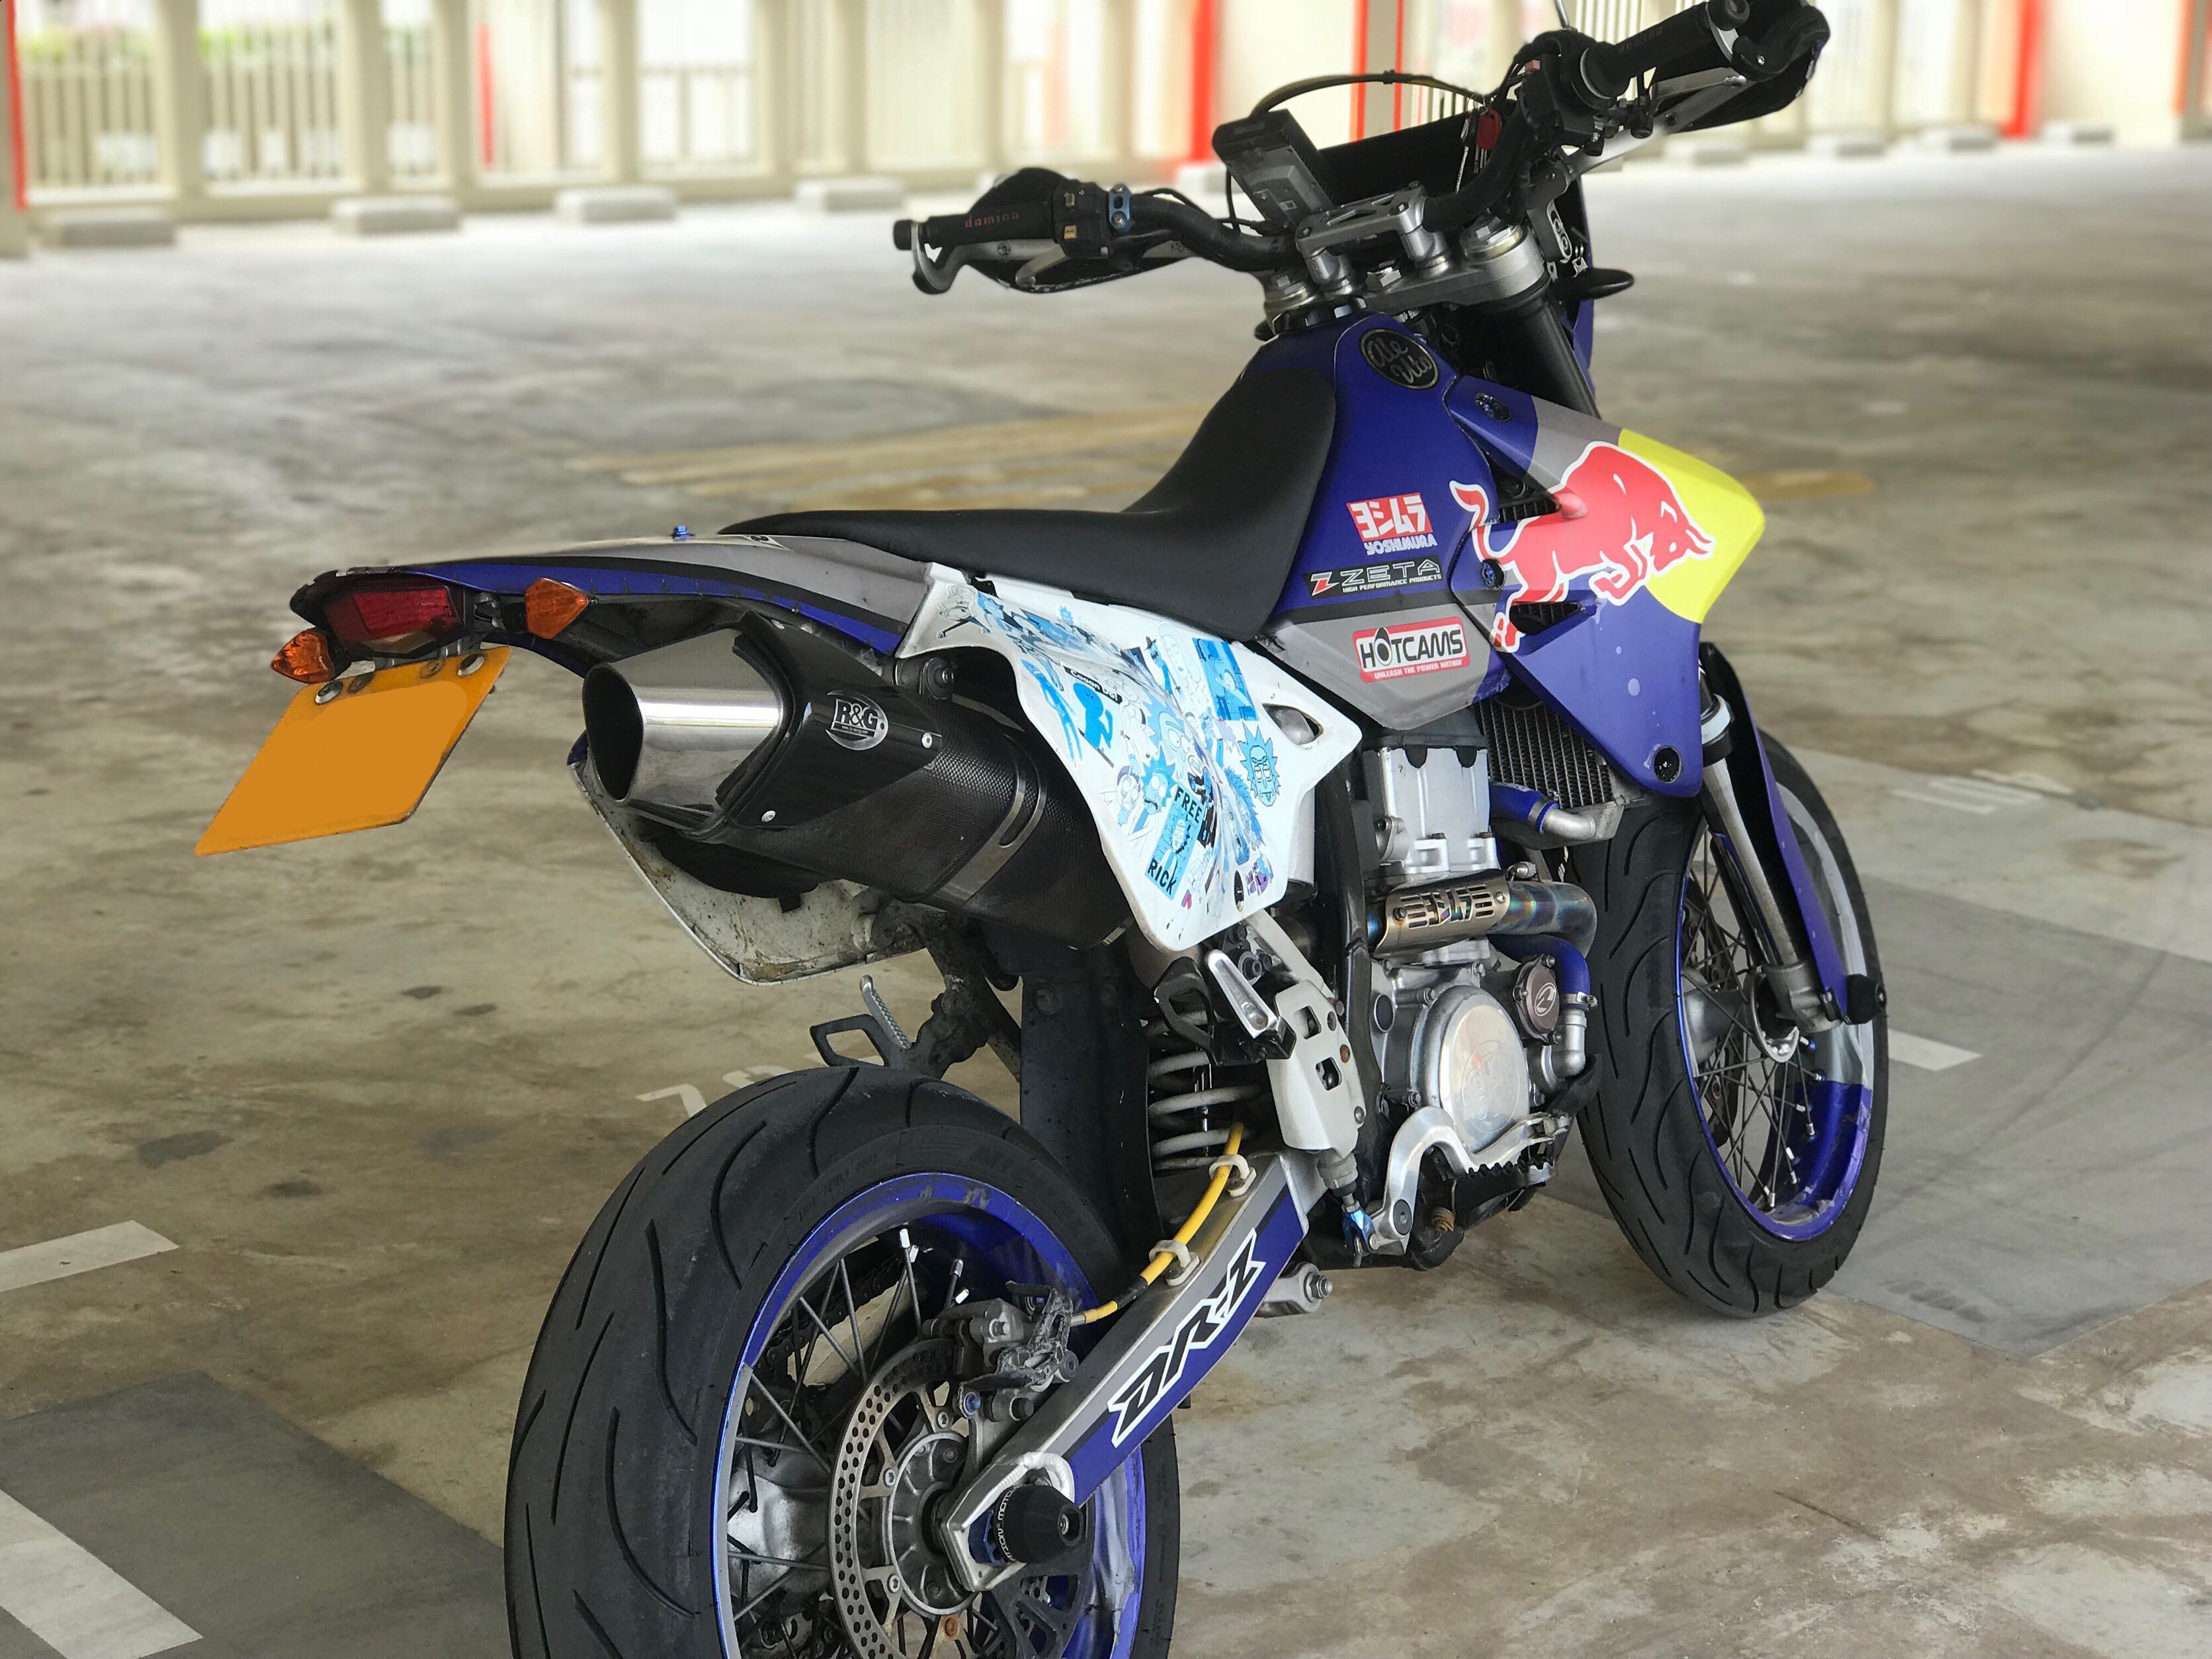 DRZ 400, Motorcycles, Motorcycles for Sale, Class 2A on Carousell